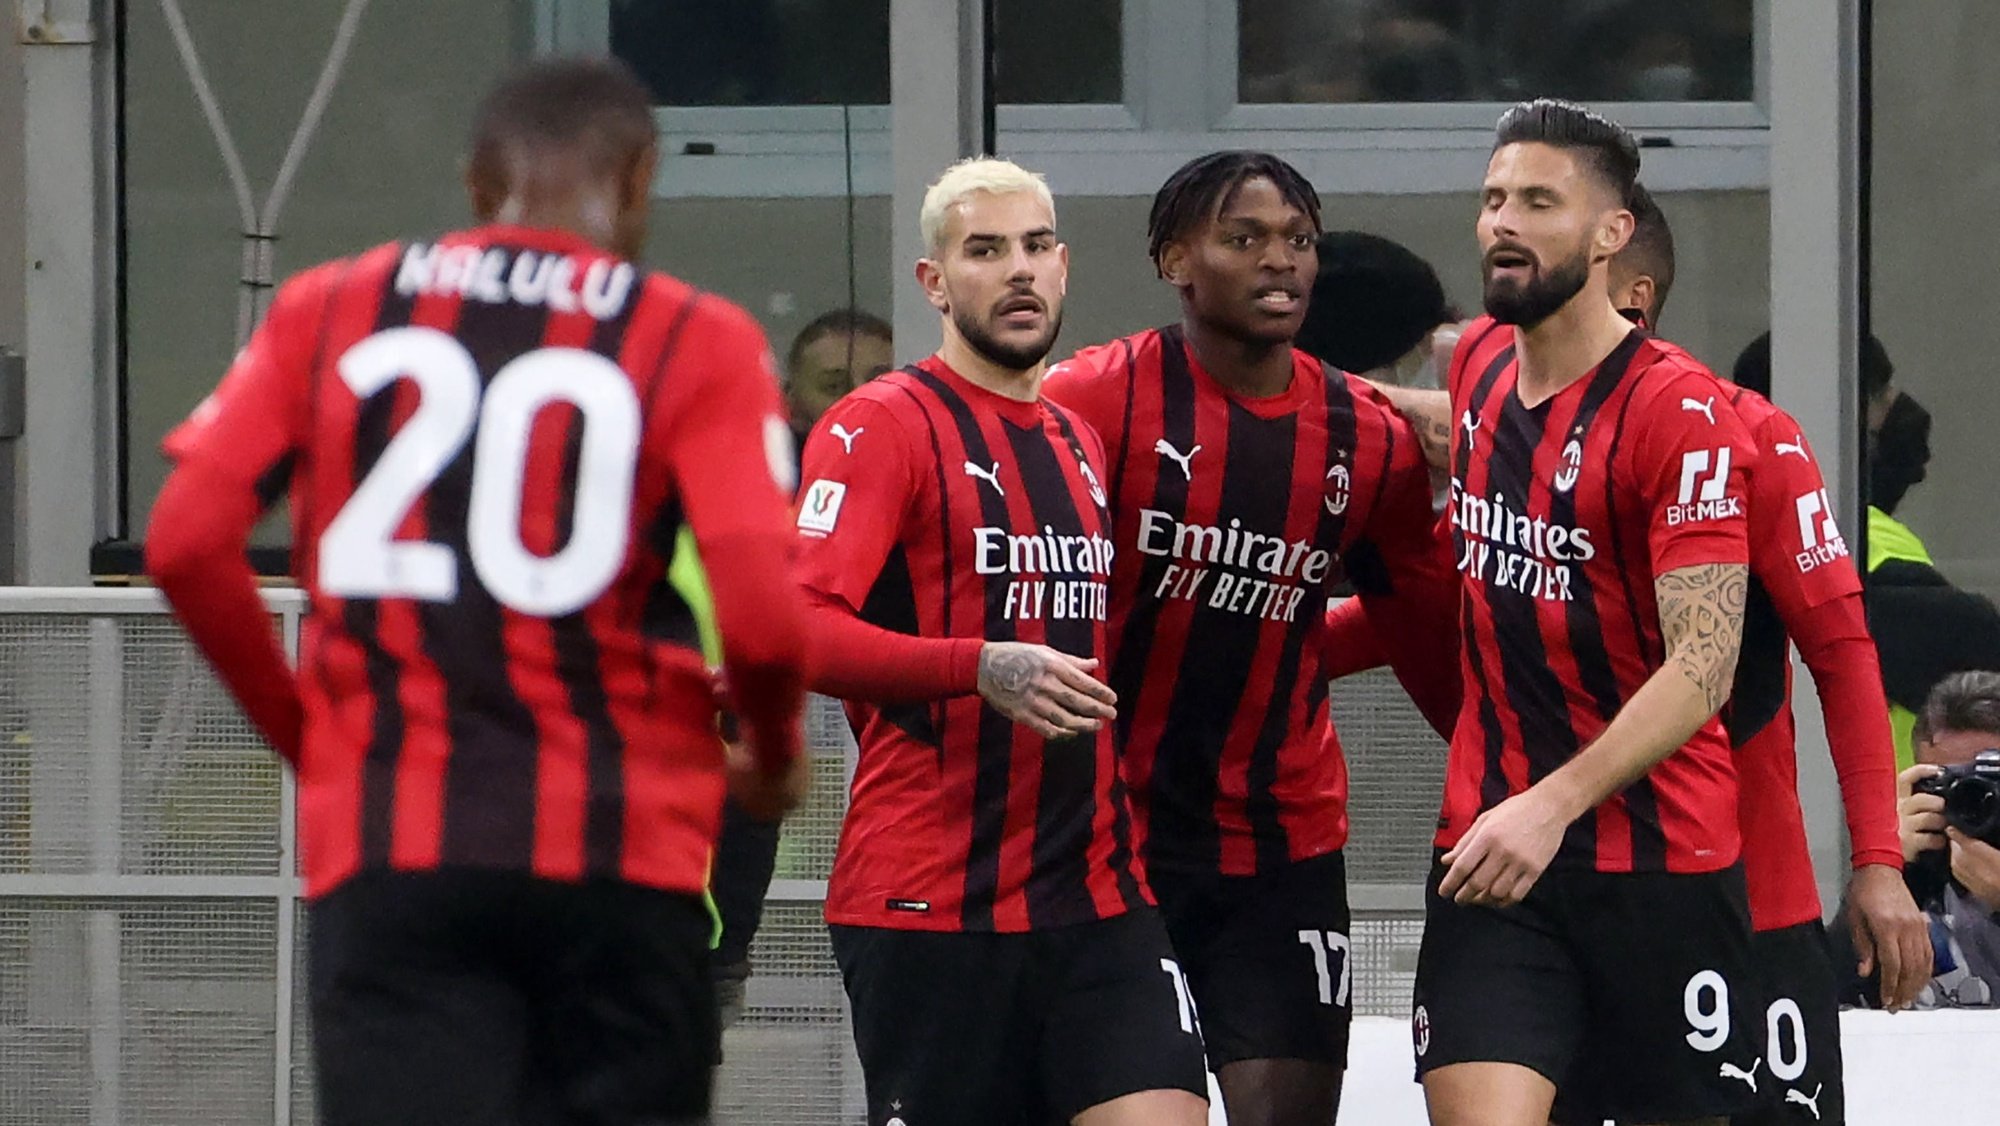 epa09741902 AC Milanâ€™s Rafael Leao (2-R) celebrates with his teammates after scoring  the opening goal during the Italian Cup quarterfinal soccer match between AC Milan and SS Lazio at Giuseppe Meazza stadium in Milan, Italy, 09 February 2022.  EPA/MATTEO BAZZI